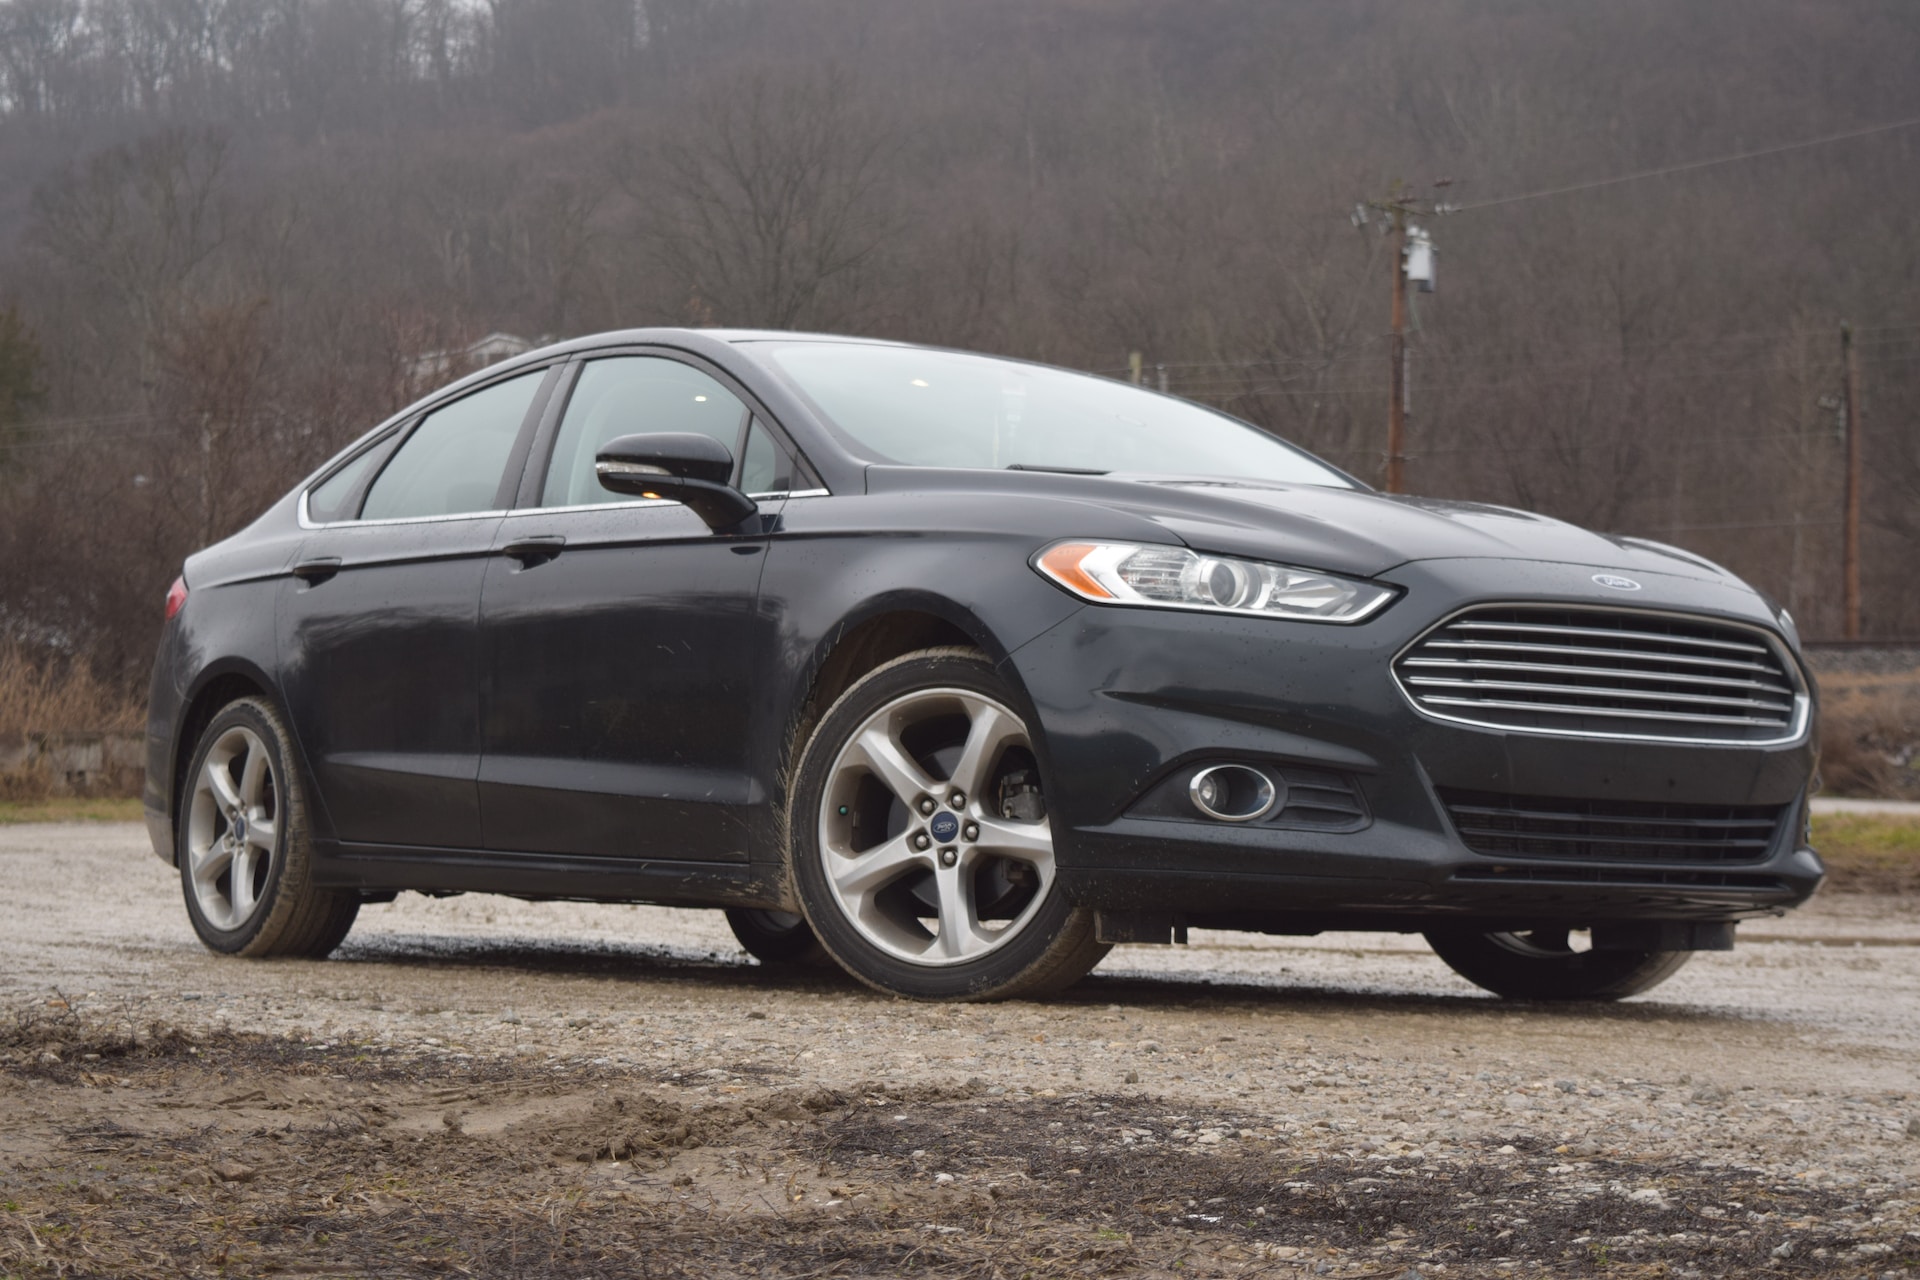 Which Years Of Used Ford Fusions Are Most Reliable? - CoPilot